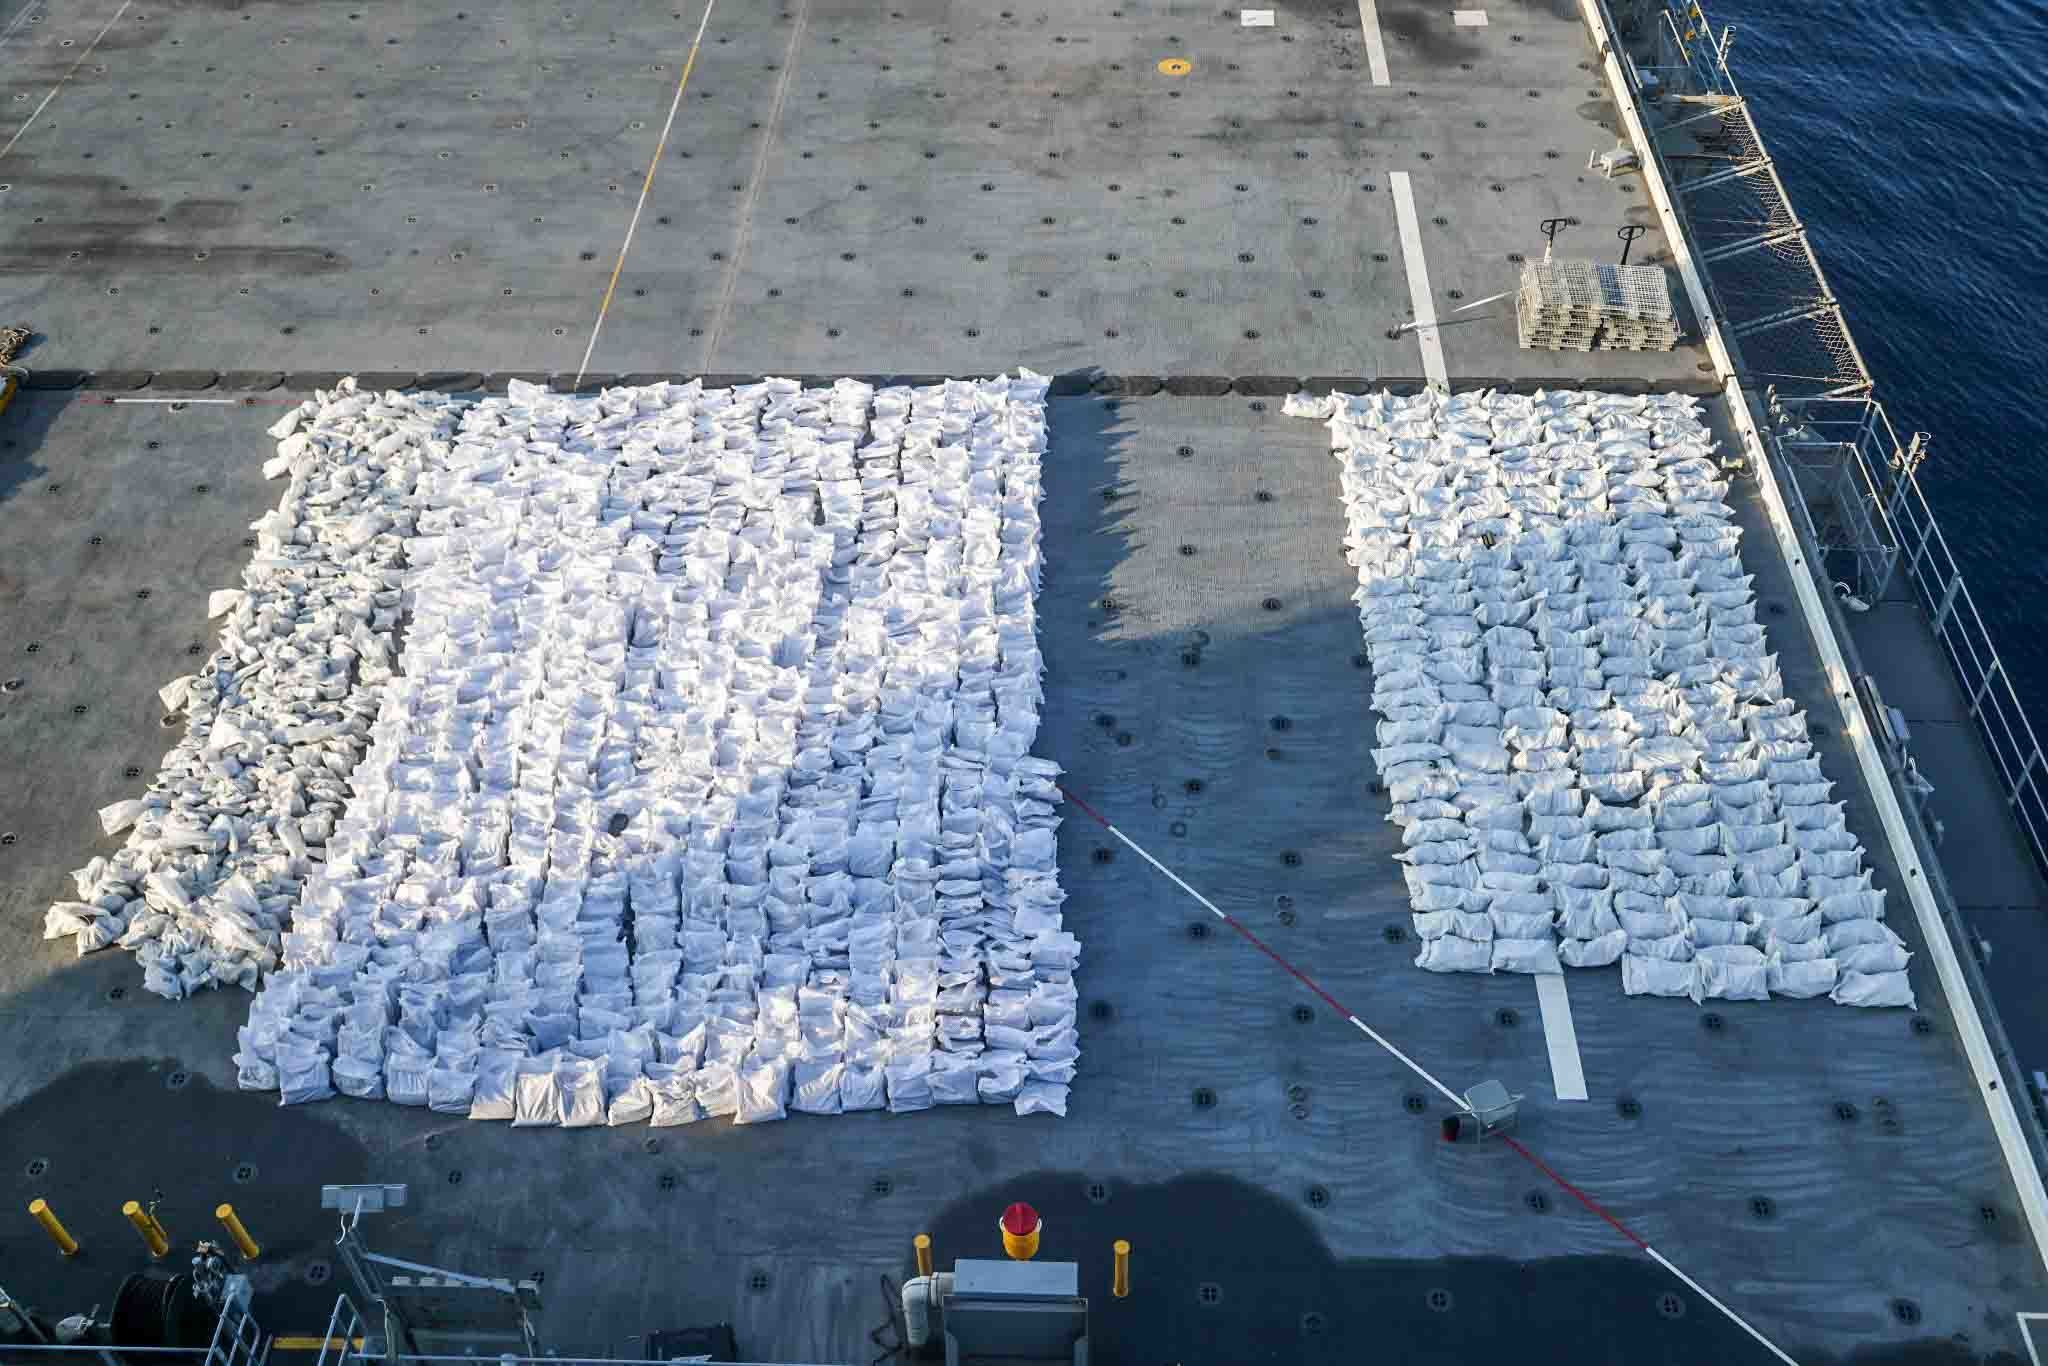 U.S. Navy Seizes Over 1 Million Rounds Of Ammunition, Other Weapons Destined For Yemen (Photos)